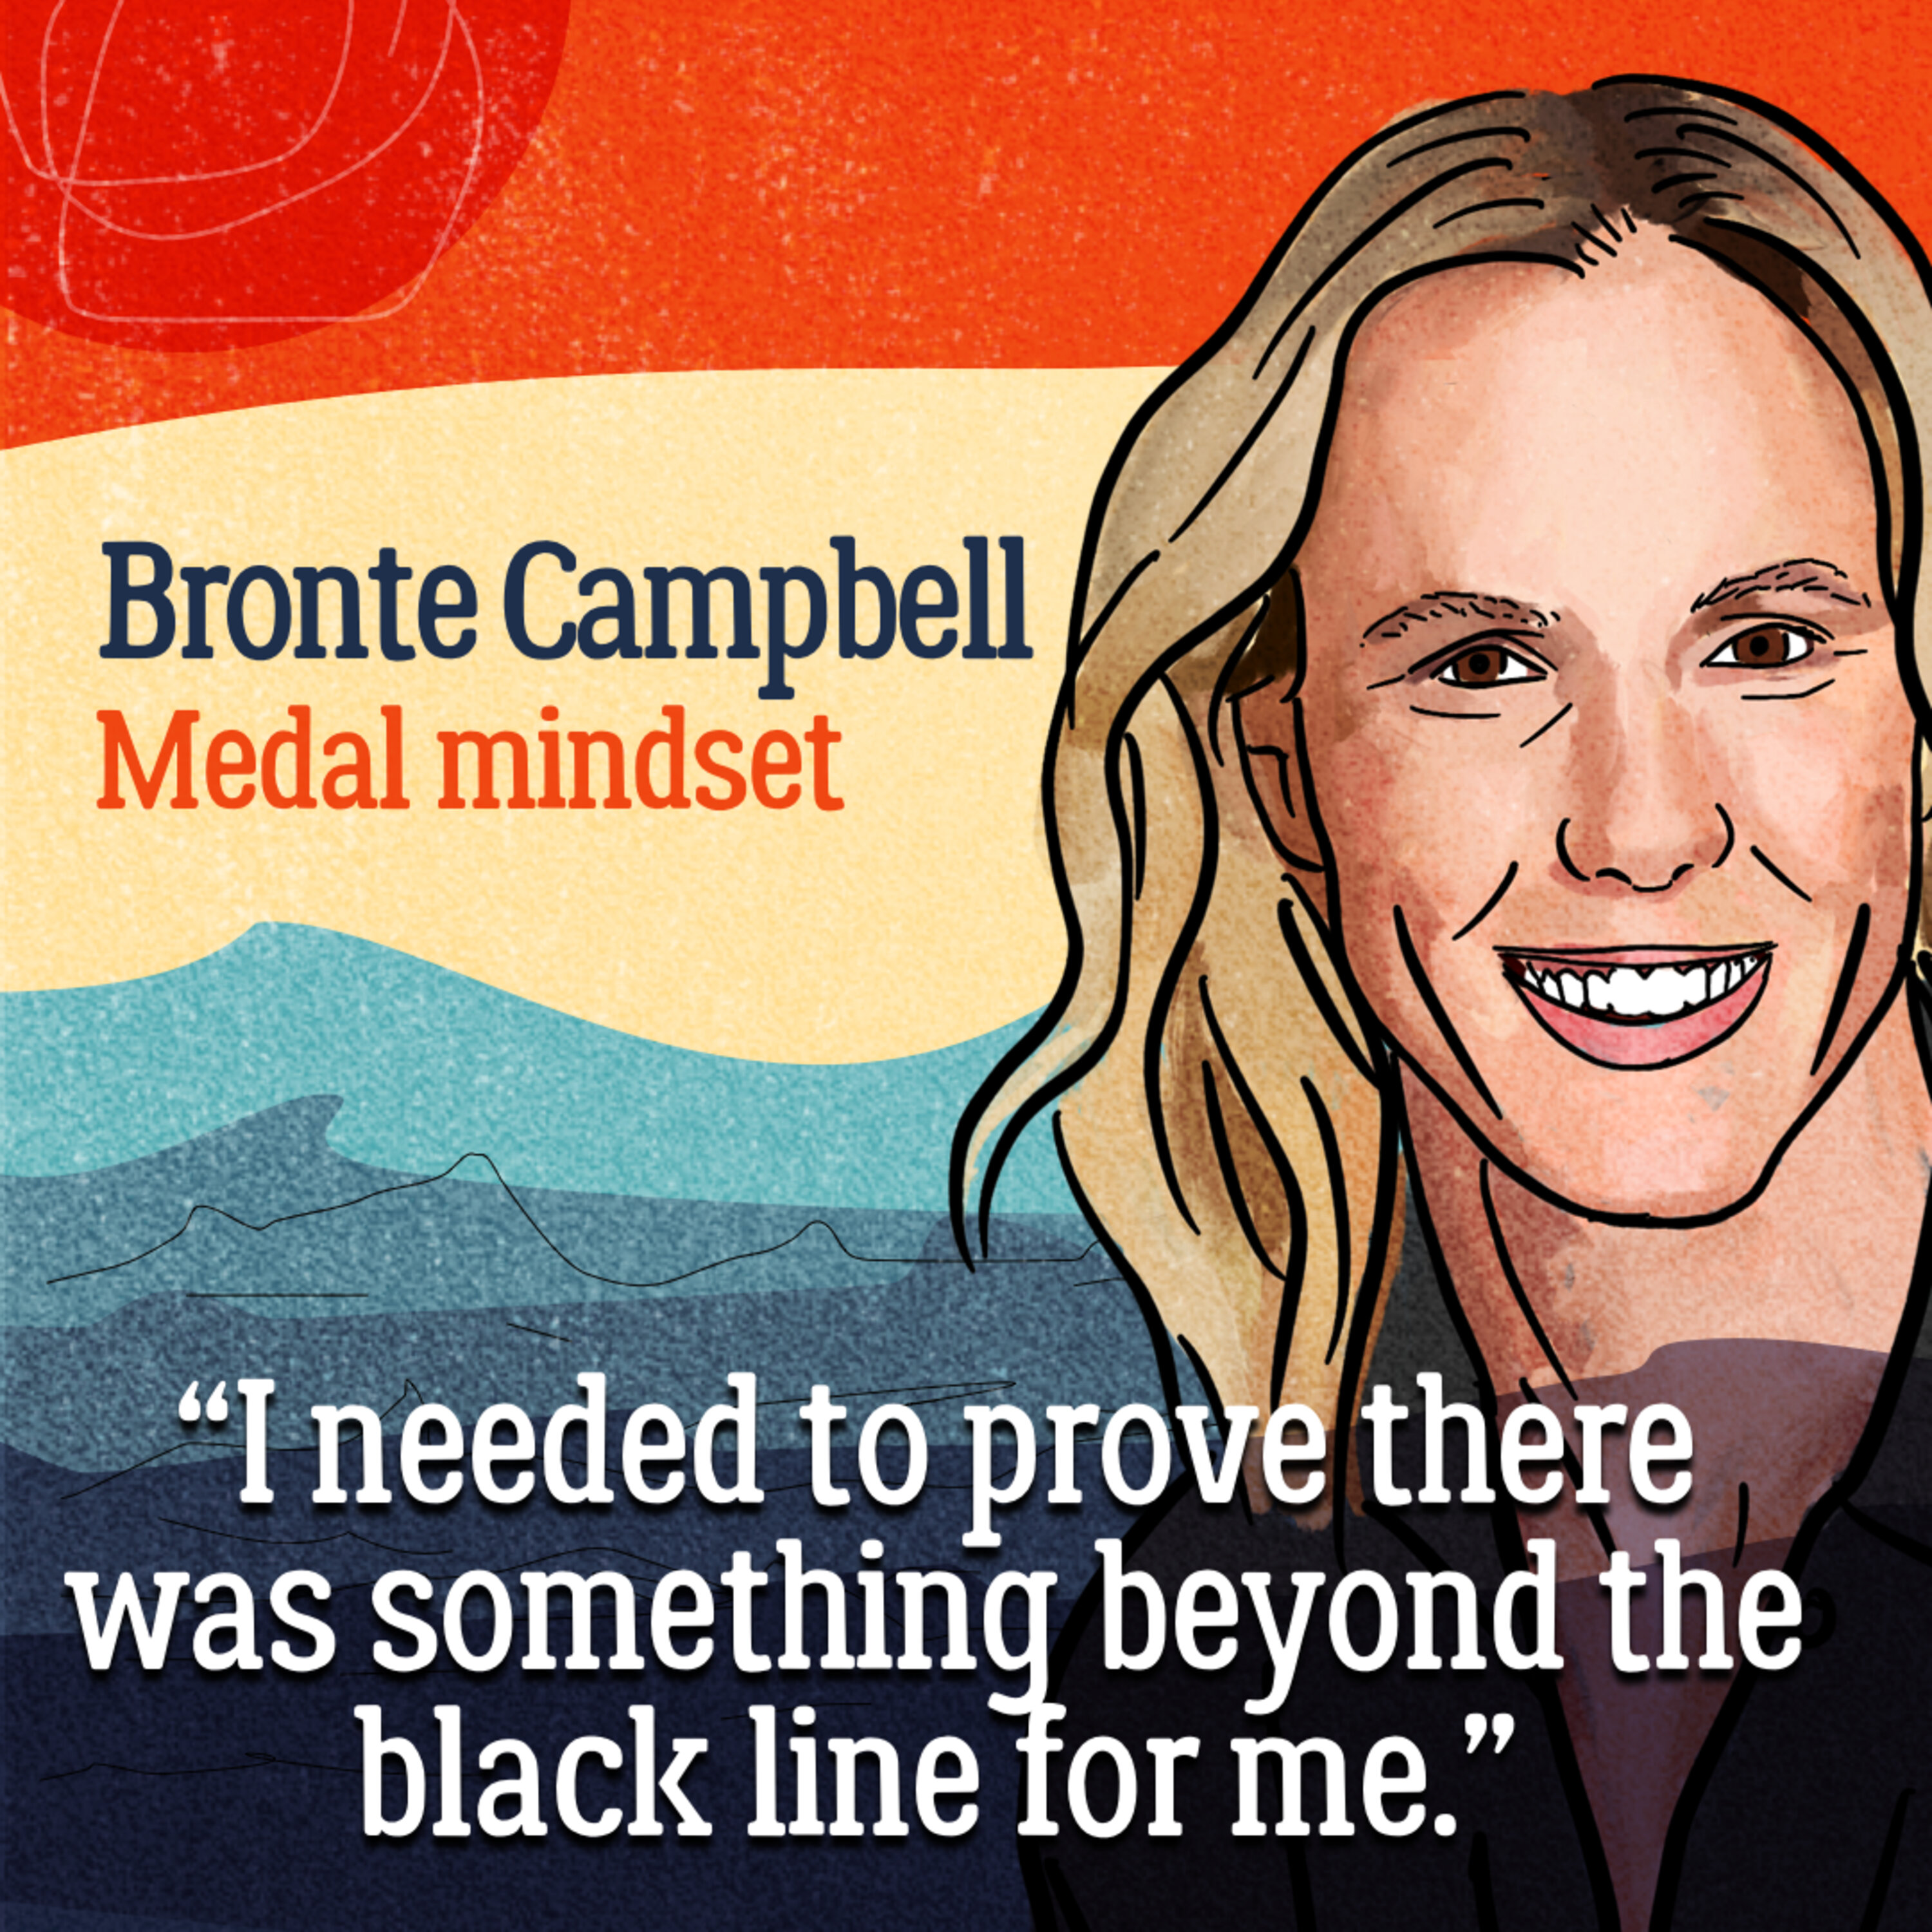 Twists and tumble-turns – Bronte Campbell’s road to Olympic glory has been anything but a straight line